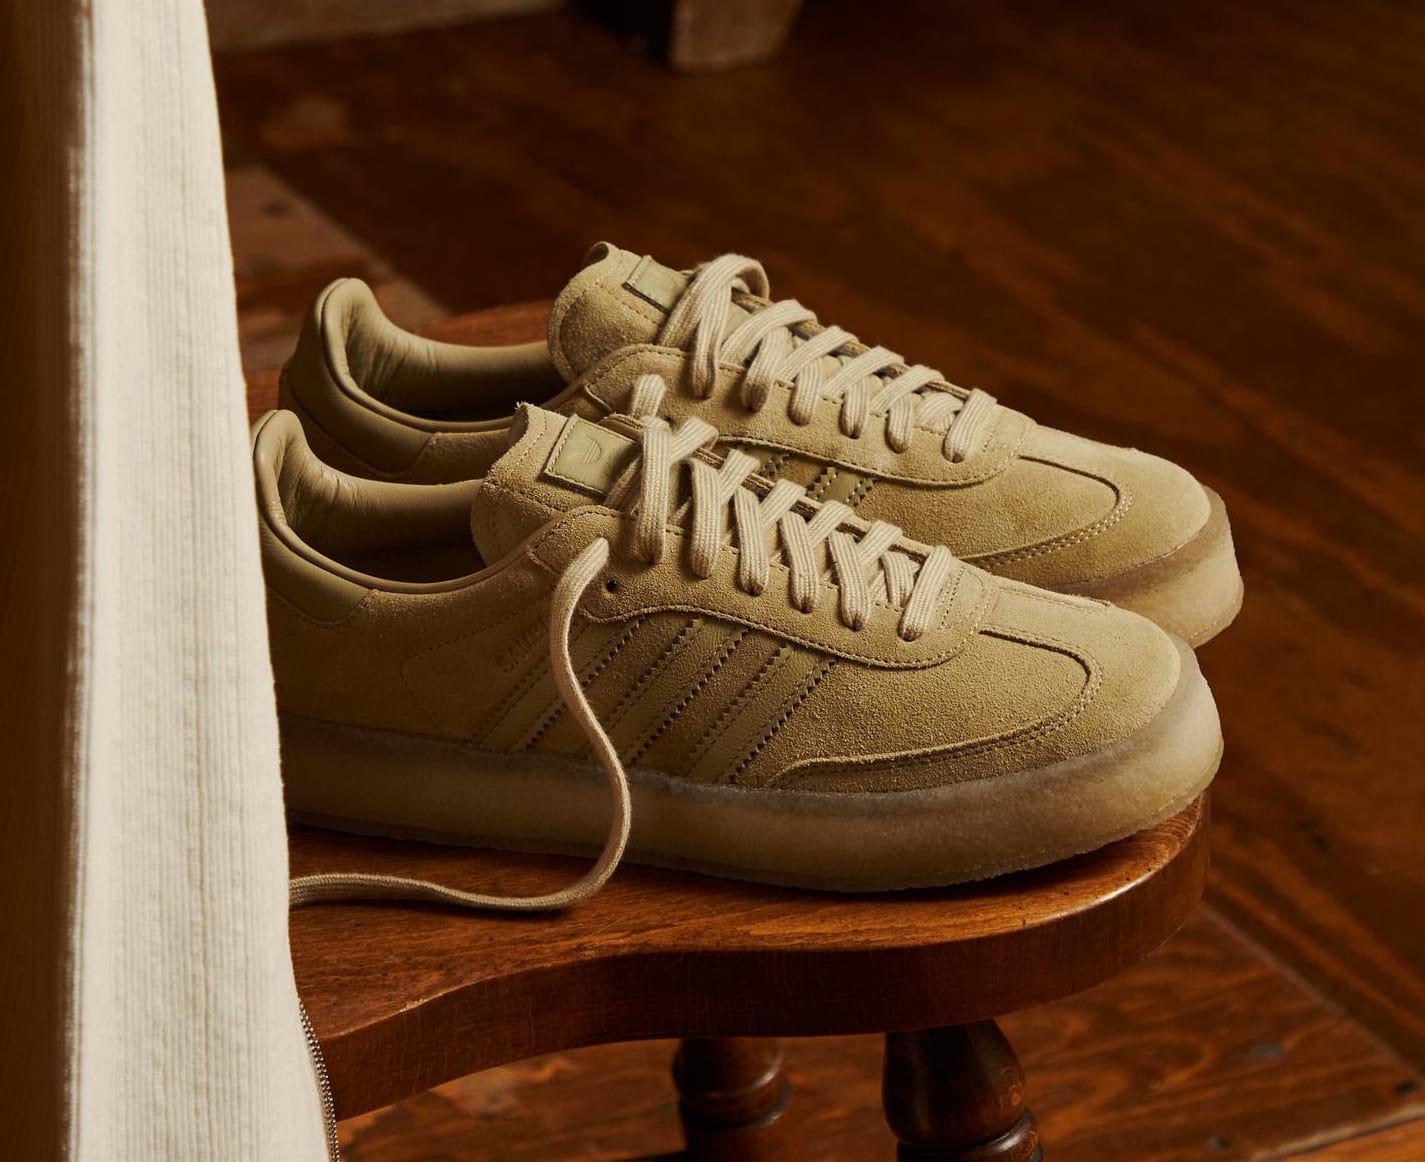 Preorders Open for the Kith x Clarks x Adidas Samba Collab | Complex